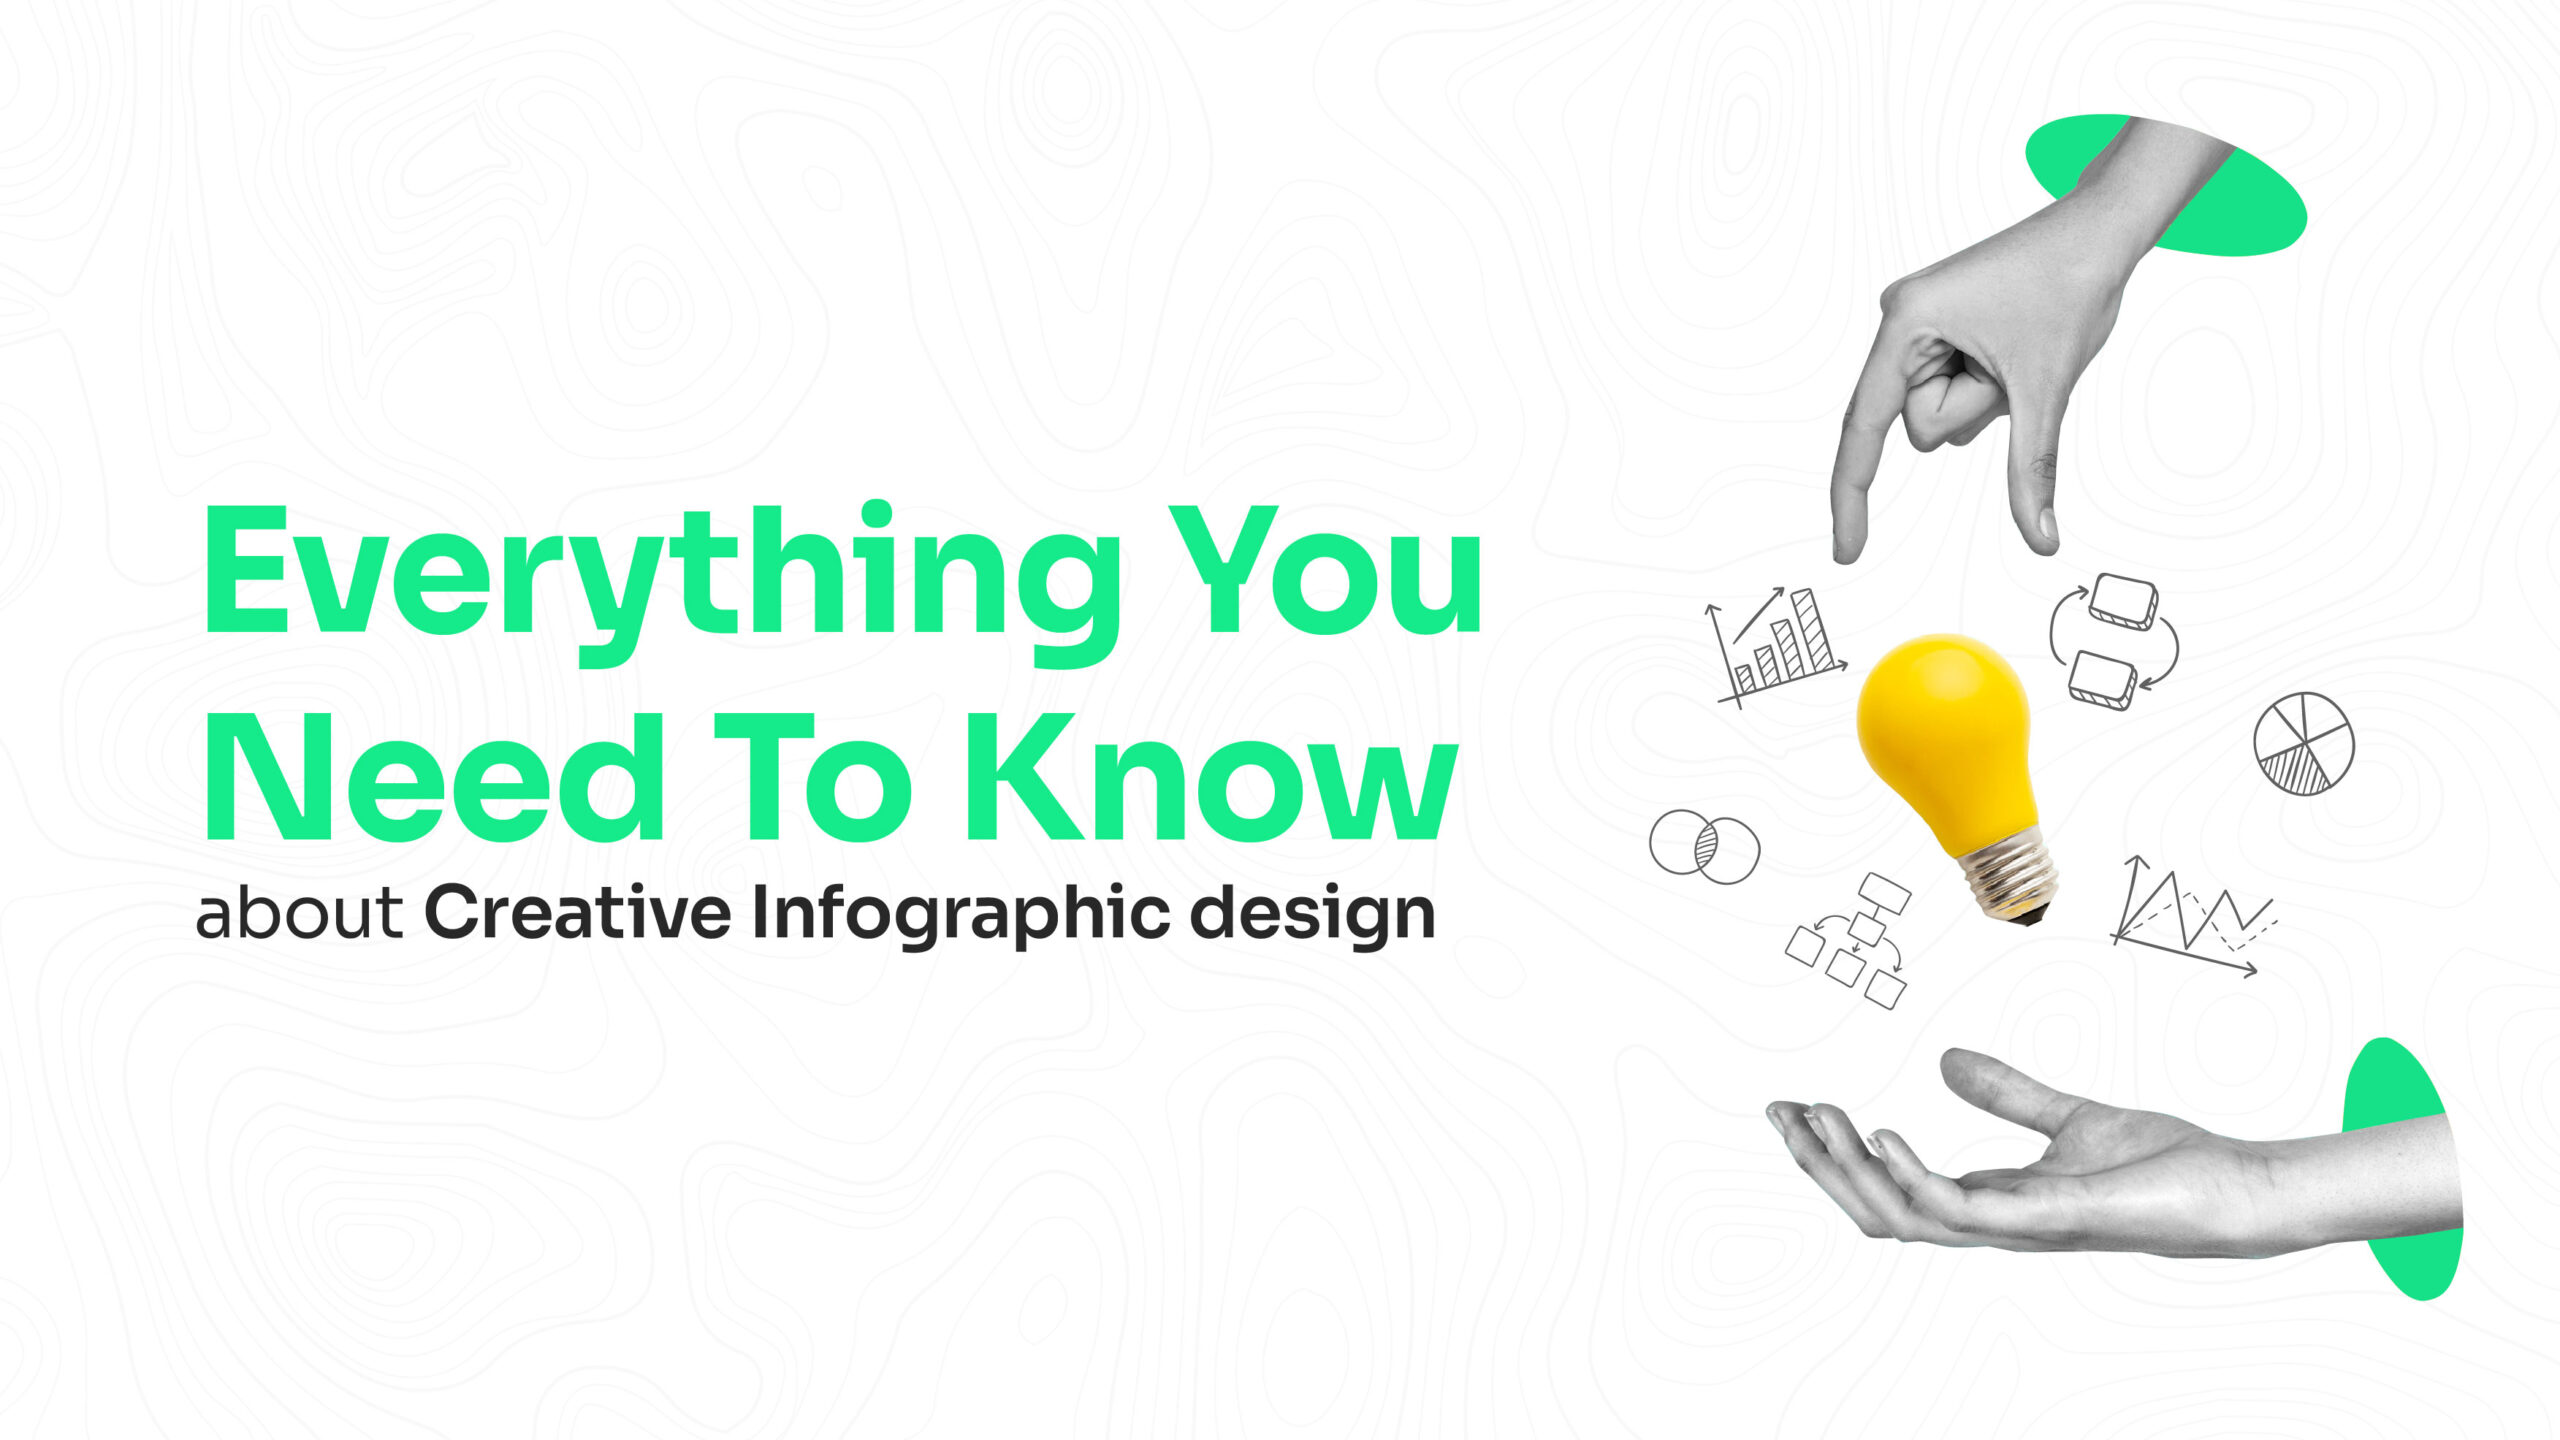 Everything you need to know about Creative Infographic design